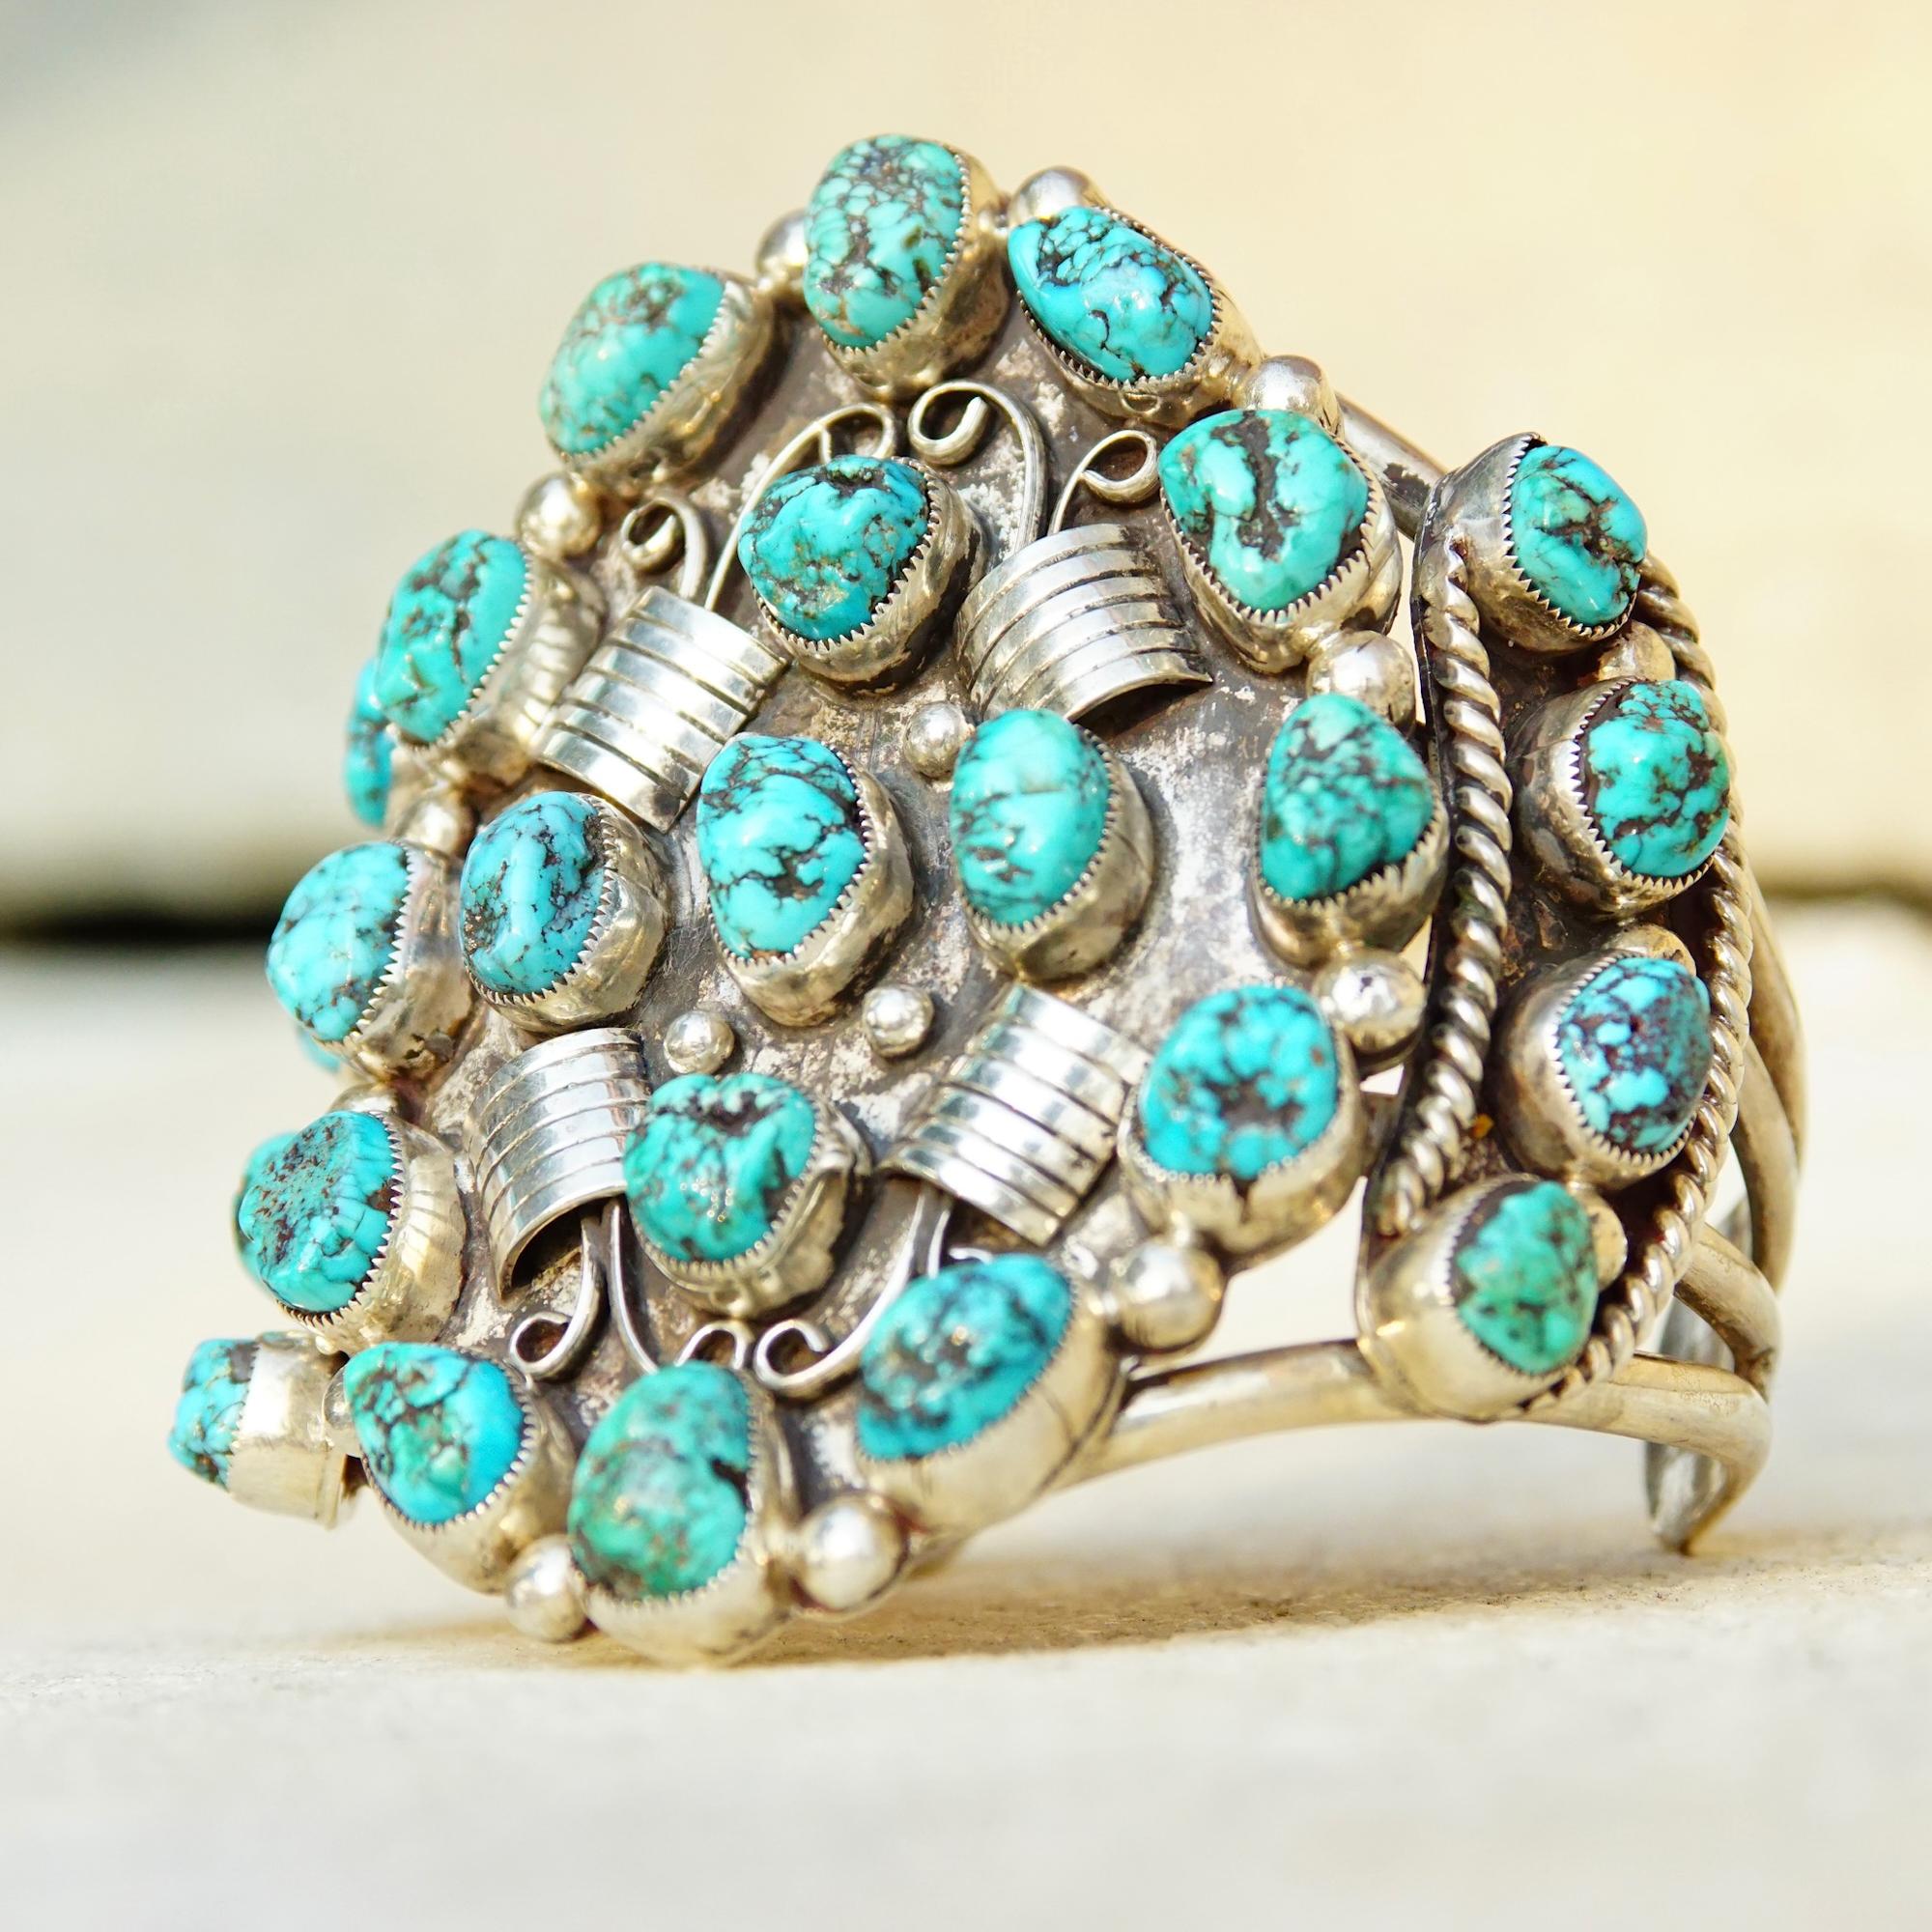 A HUGE Native American sterling silver turquoise cuff by Navajo jewelry maker Pat Platero. This incredibly badass cuff features 25 marbled turquoise stones, all roughly the same size,  organized in jagged bezels across 3 silver panels. The main oval